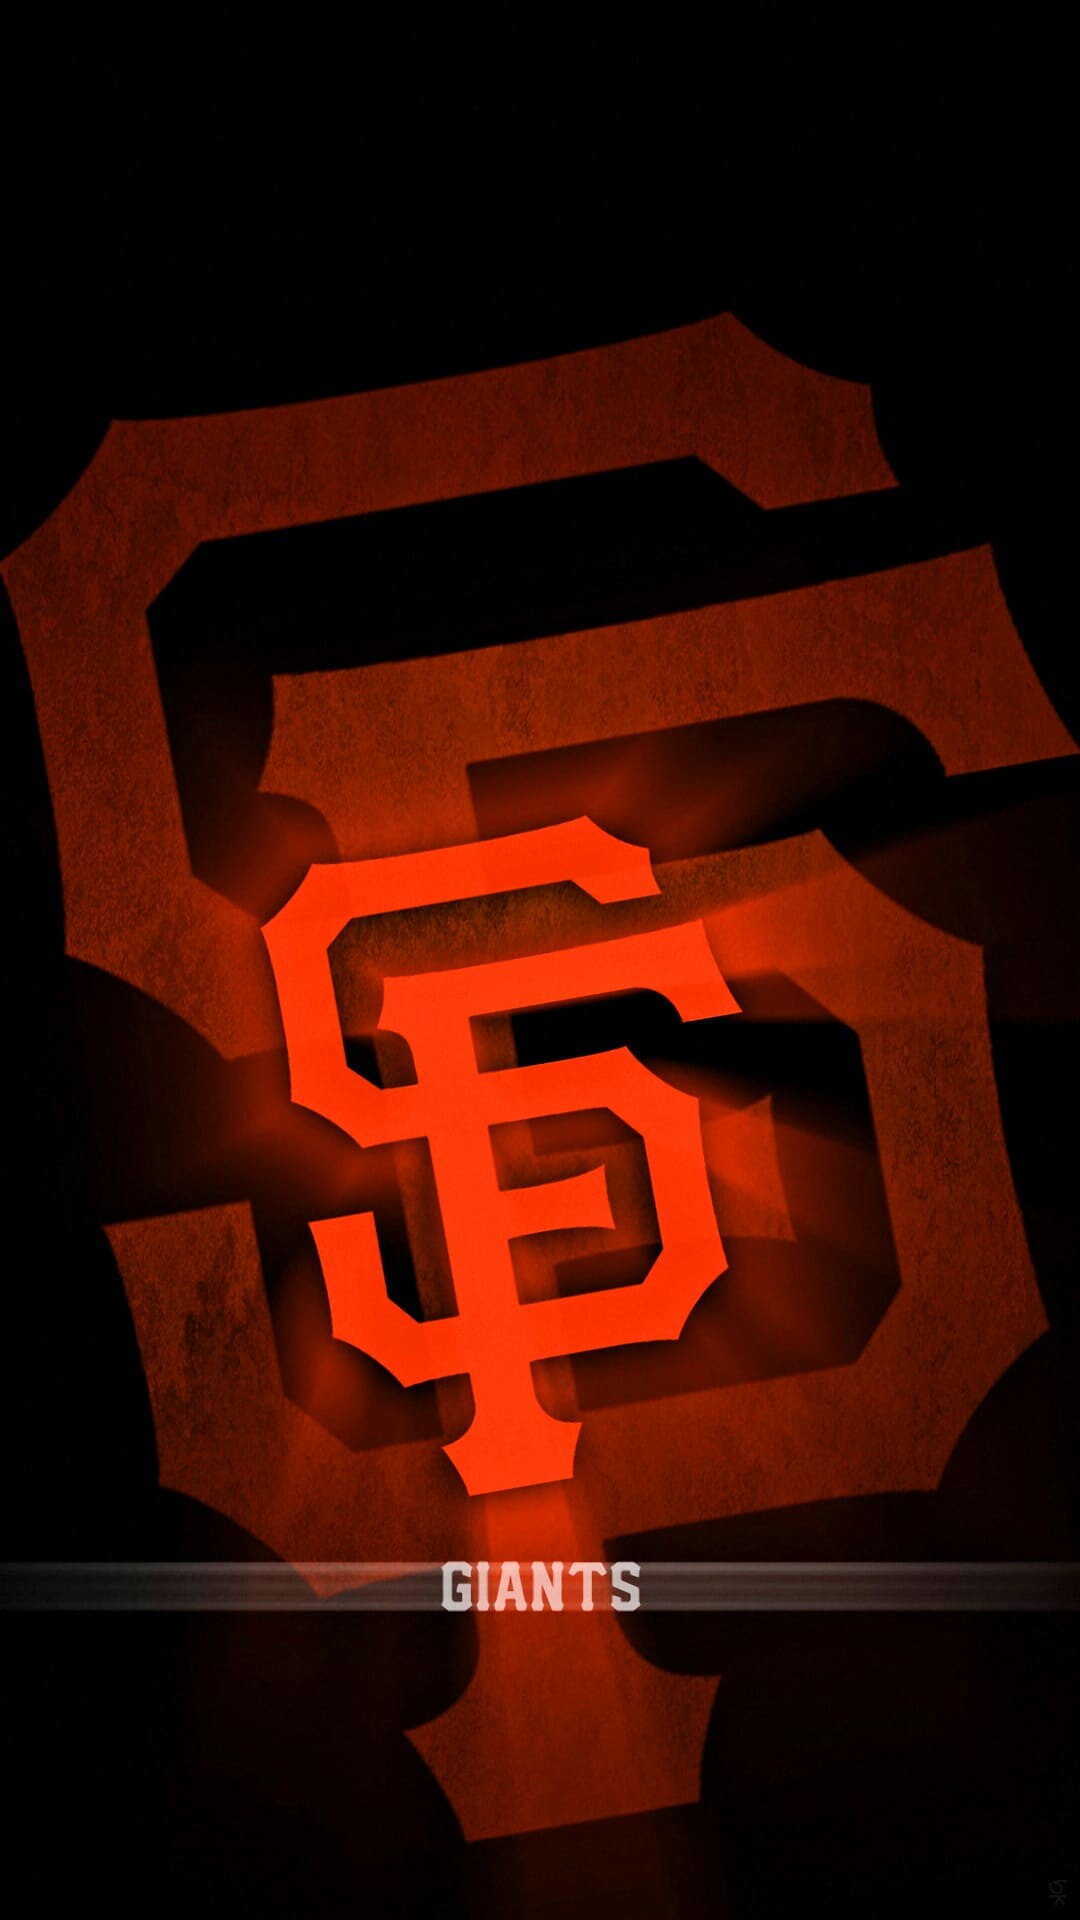 San Francisco Giants: Pitcher Mike McCormick became the first franchise Cy Young Award winner. 1080x1920 Full HD Wallpaper.